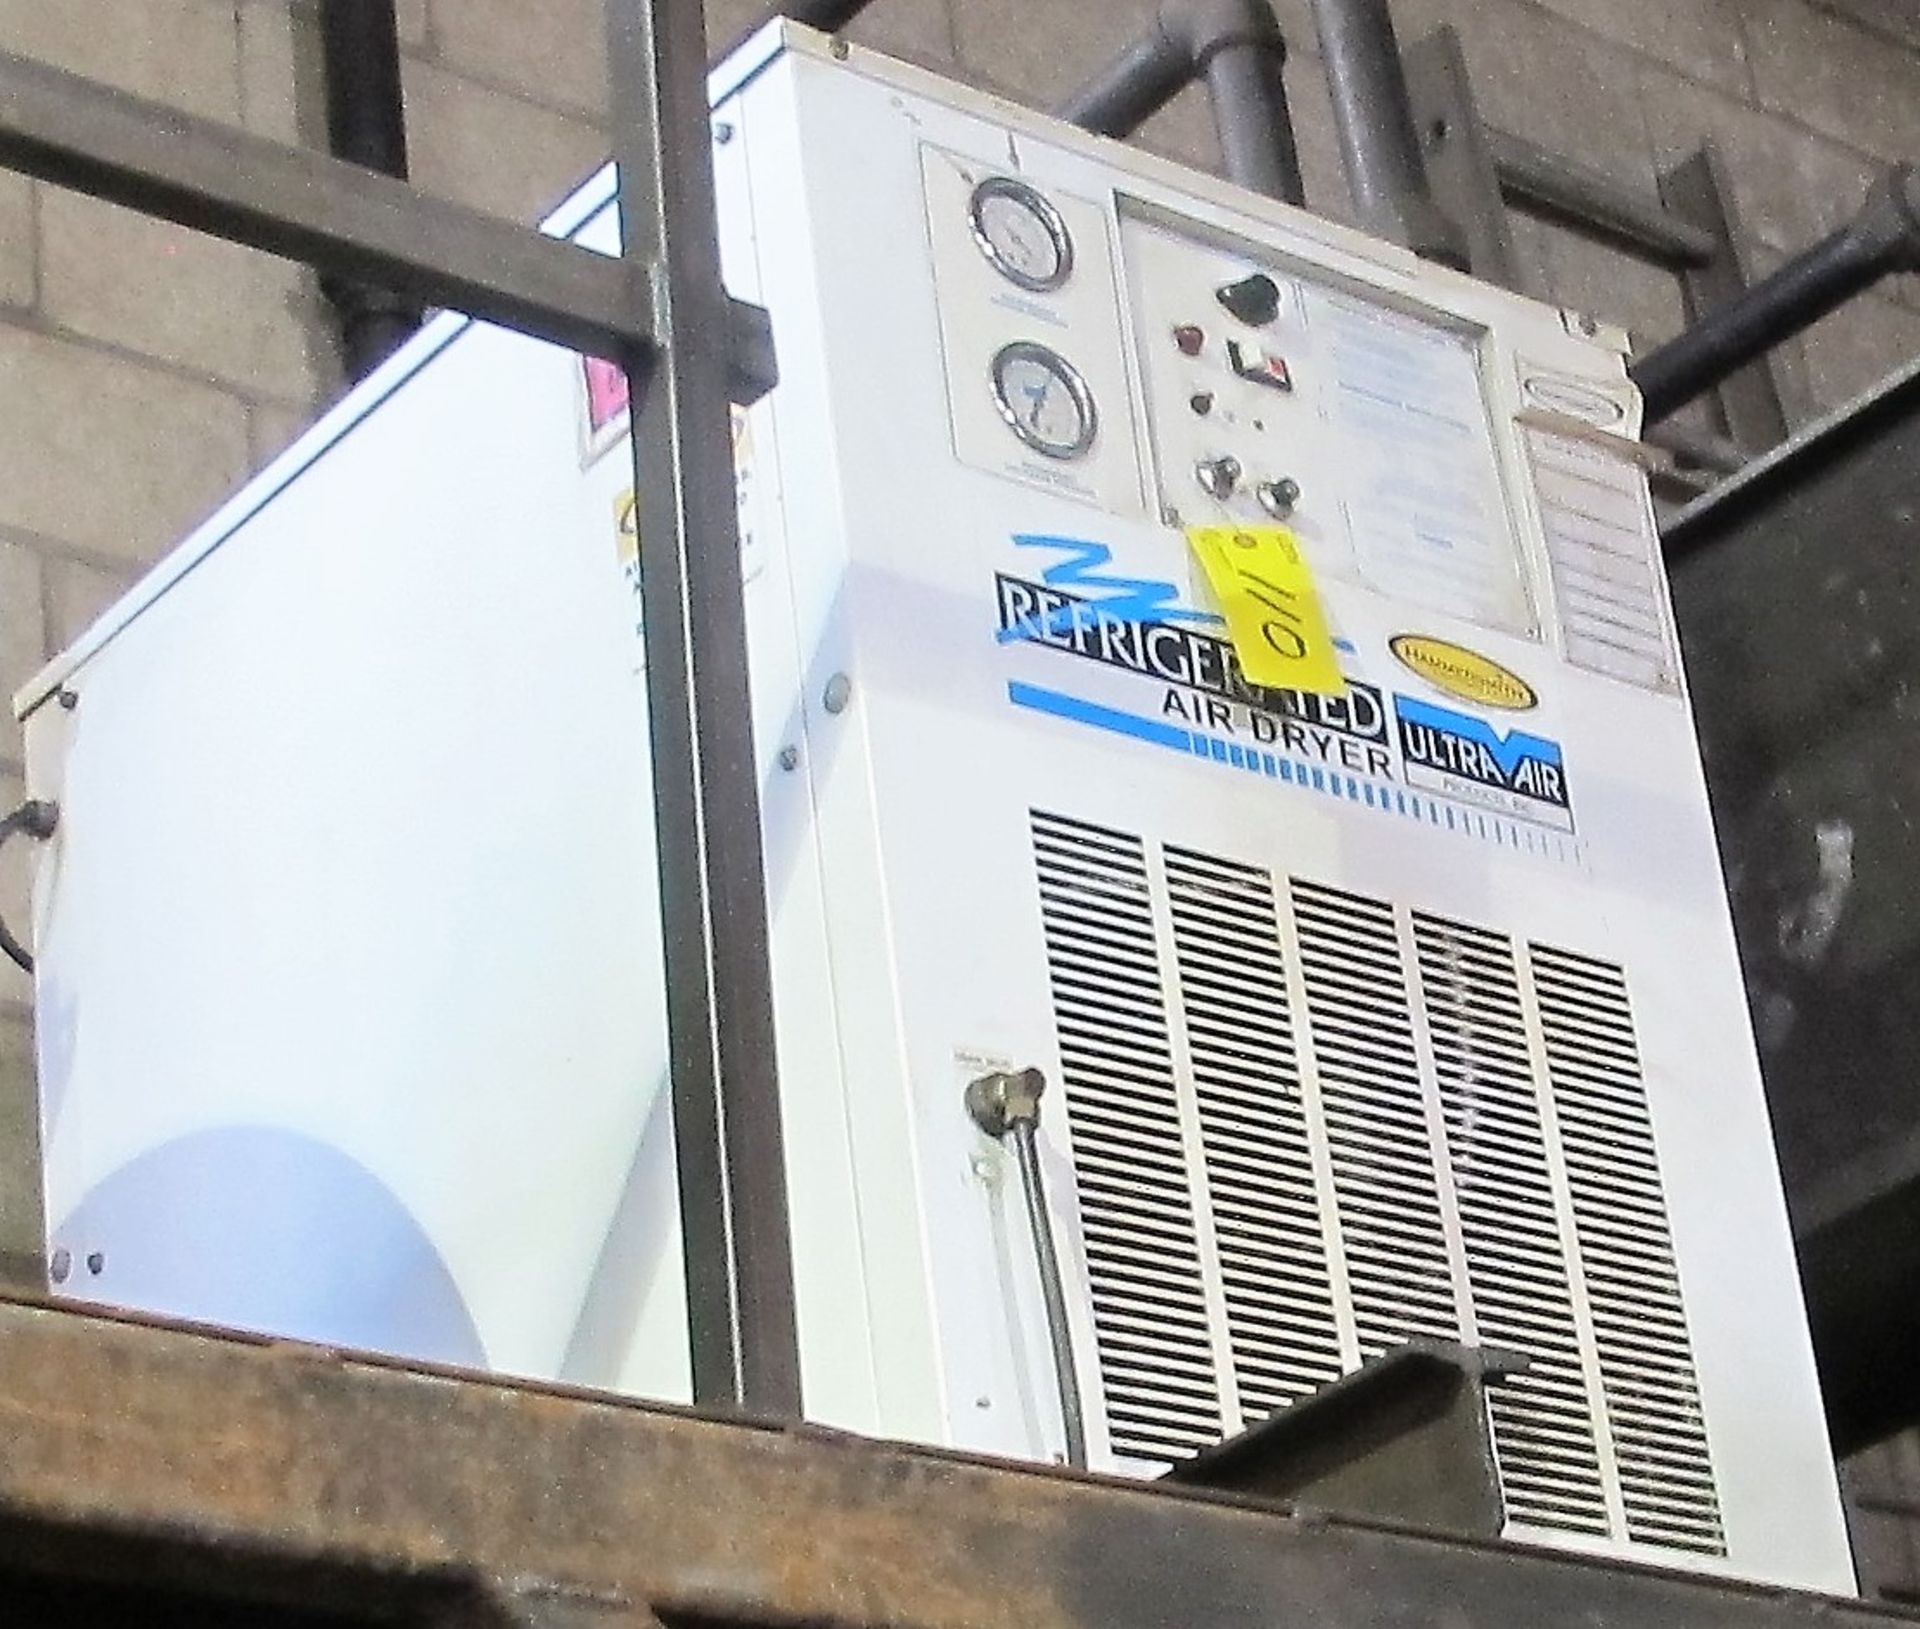 ULTRA AIR REFRIGERATED AIR DRYER